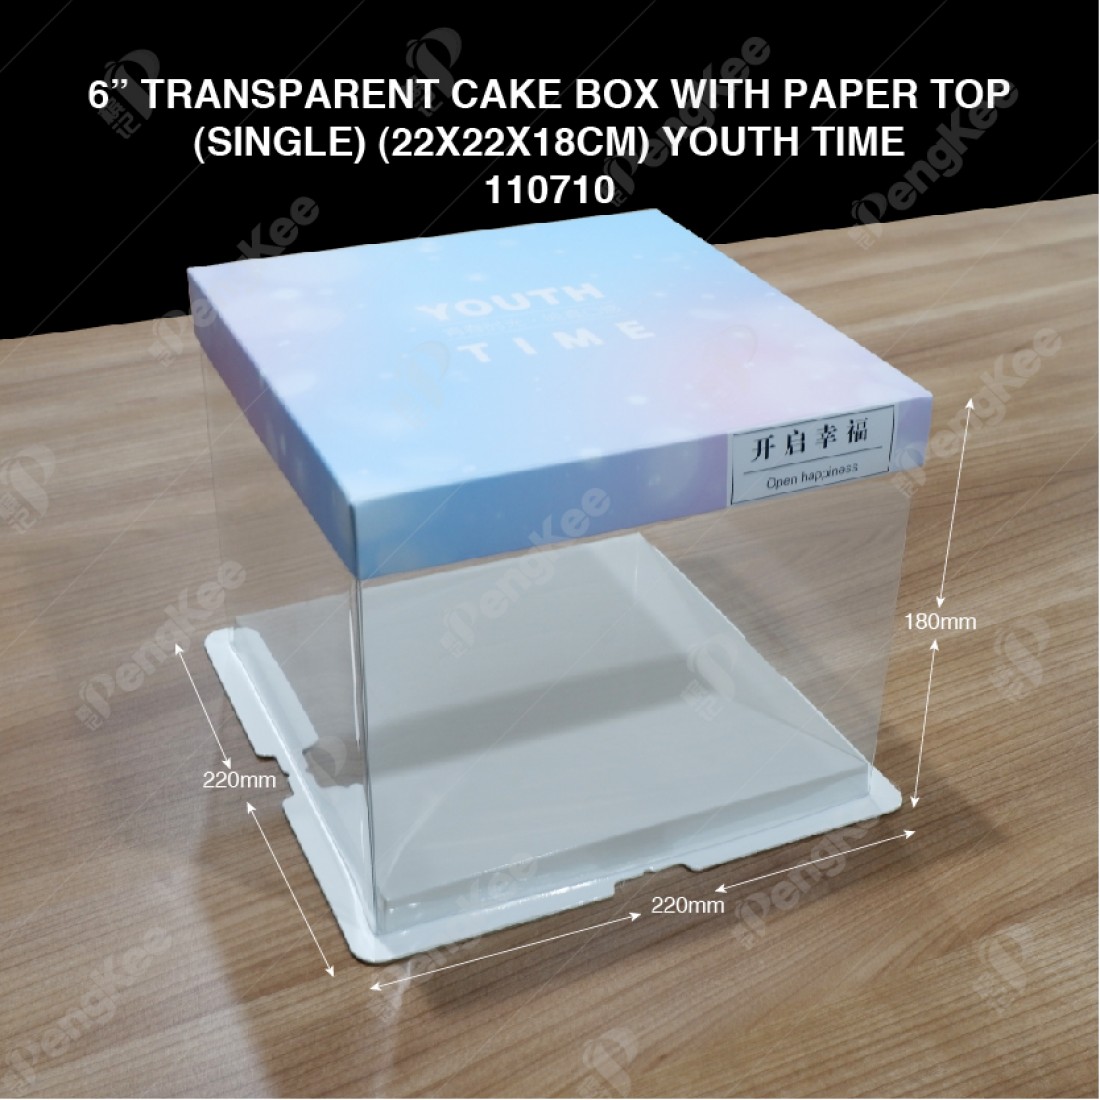 6" TRANSPARENT CAKE BOX WITH PAPER TOP(SINGLE) (22*22*18CM)- YOUTH TIME